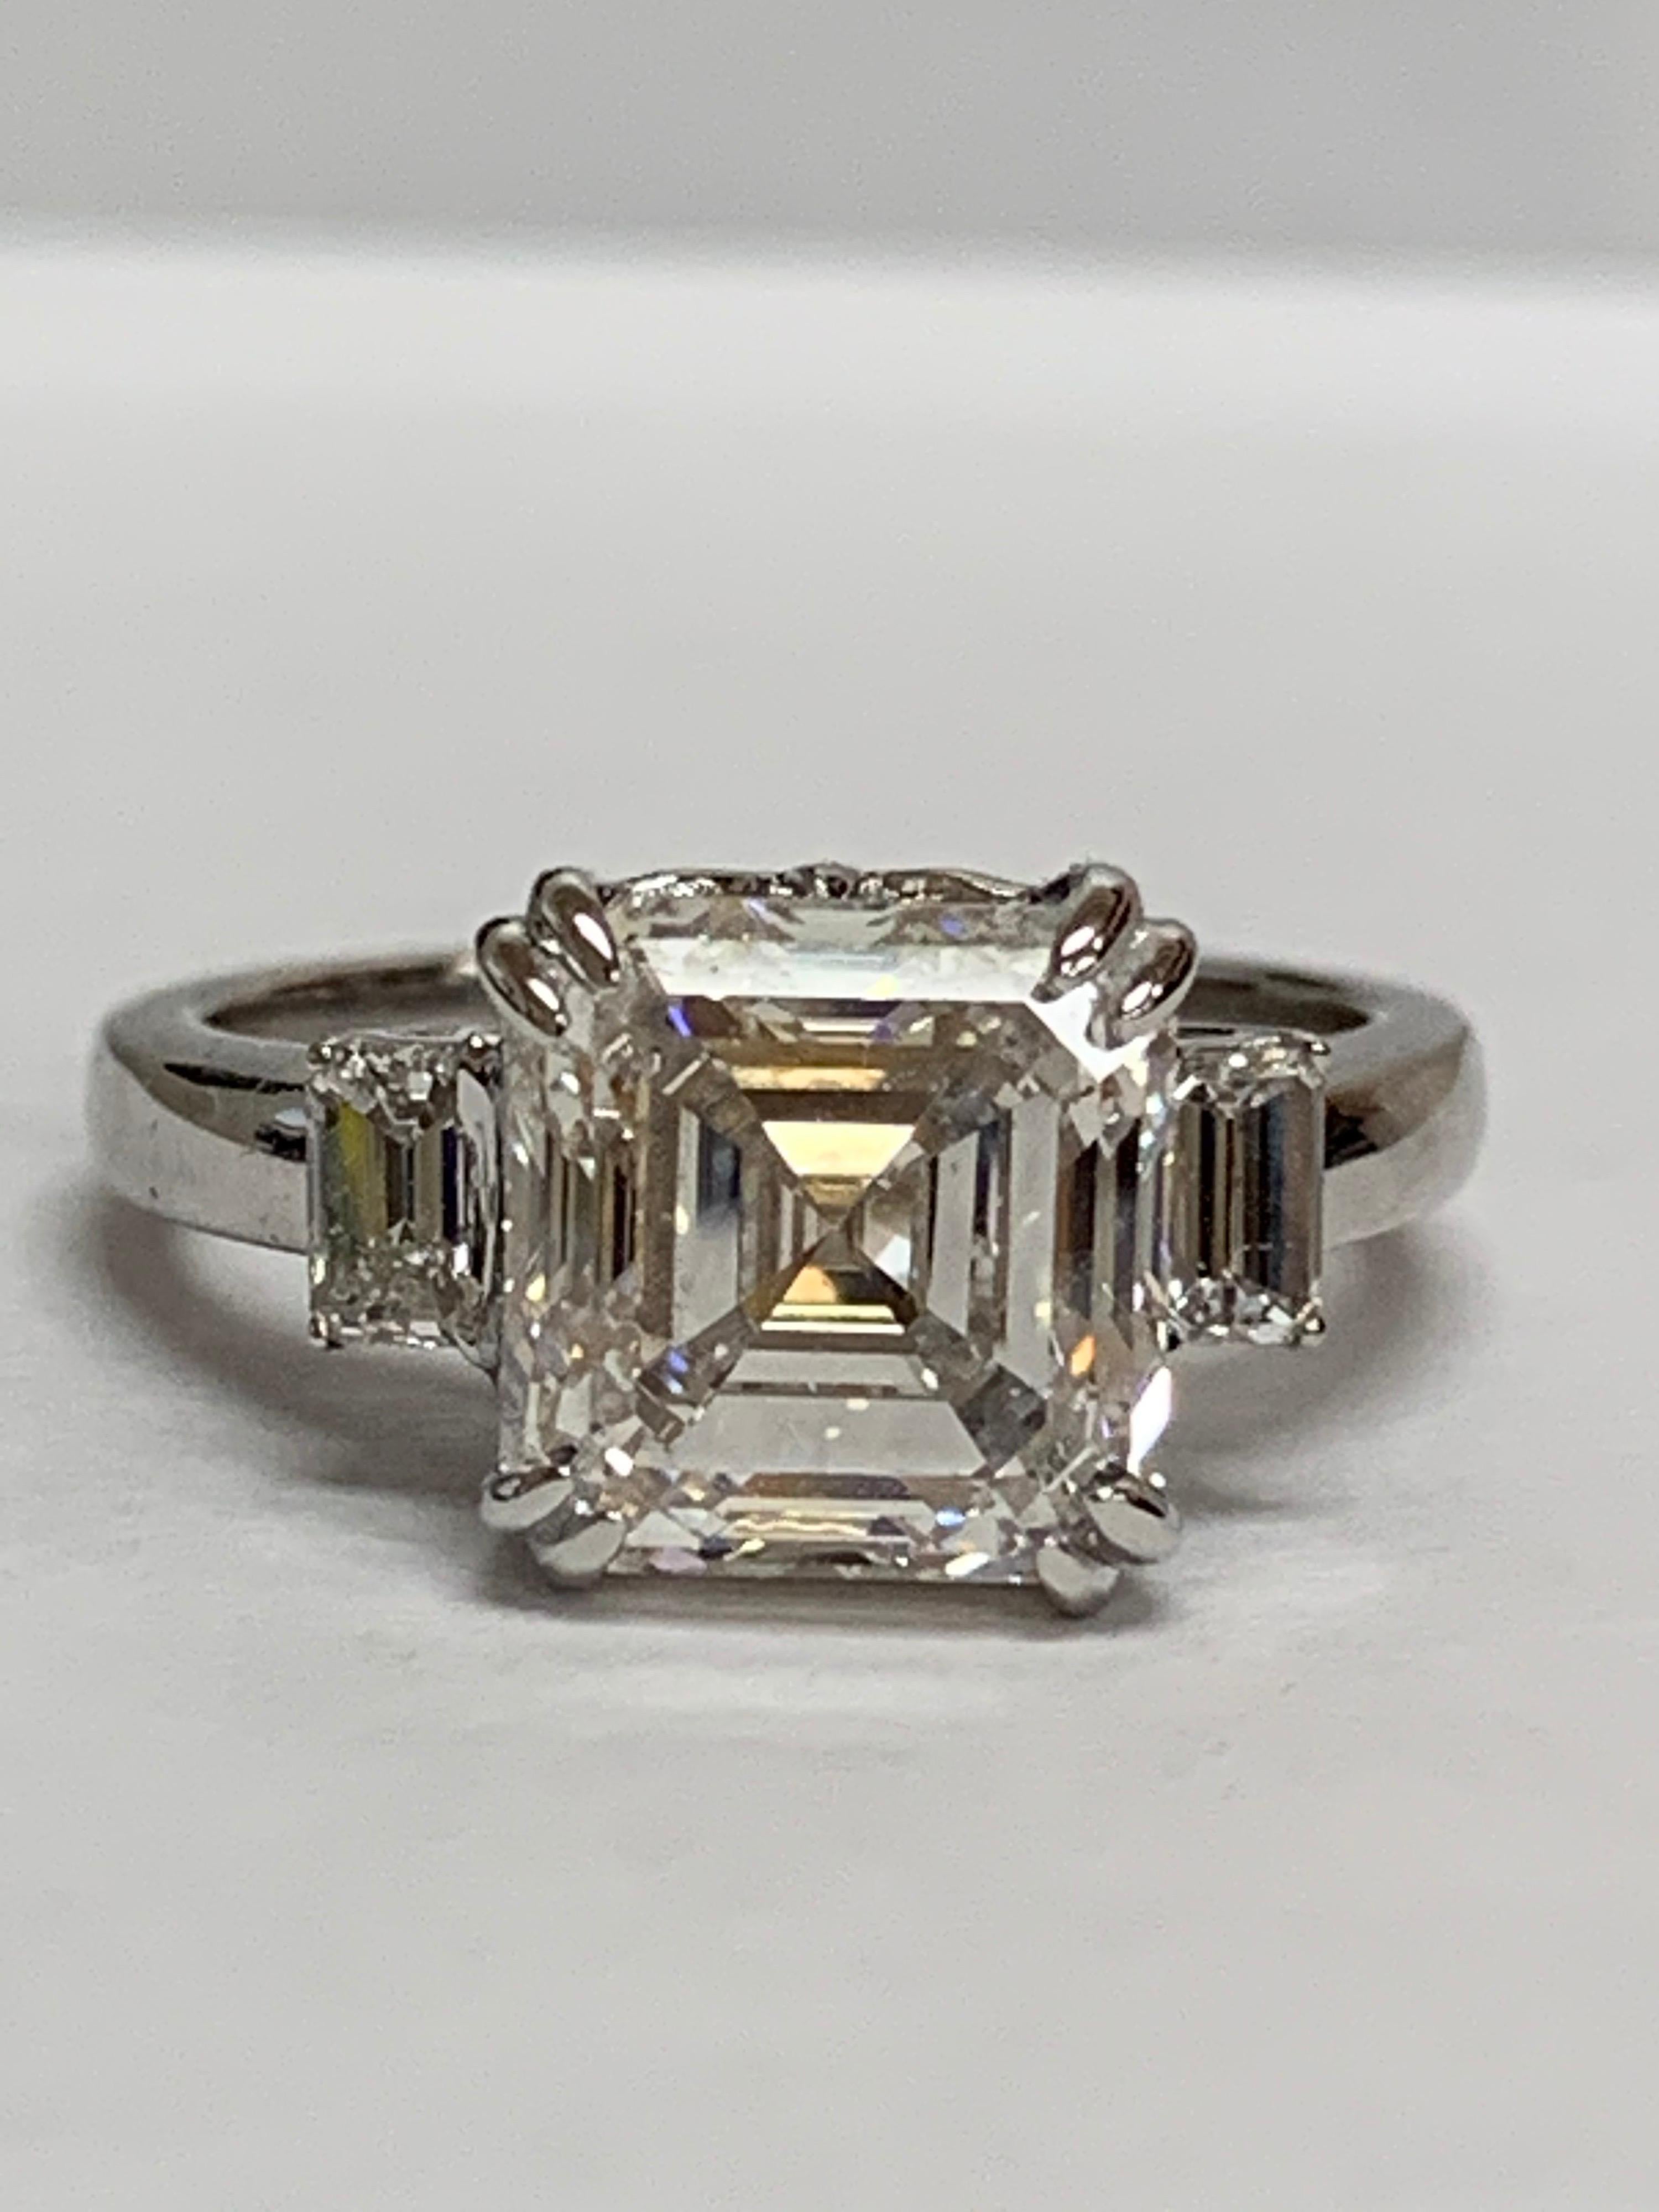 GIA Certified 4.69 Carat  Asscher cut diamond Ring is one of a kind Handcrafted Ring . Natural Diamond is set in 18 Karat white gold with Total diamond weight of  0.37 carat Emerald cut Diamond is elegant Ring . Once you see the ring in your hand